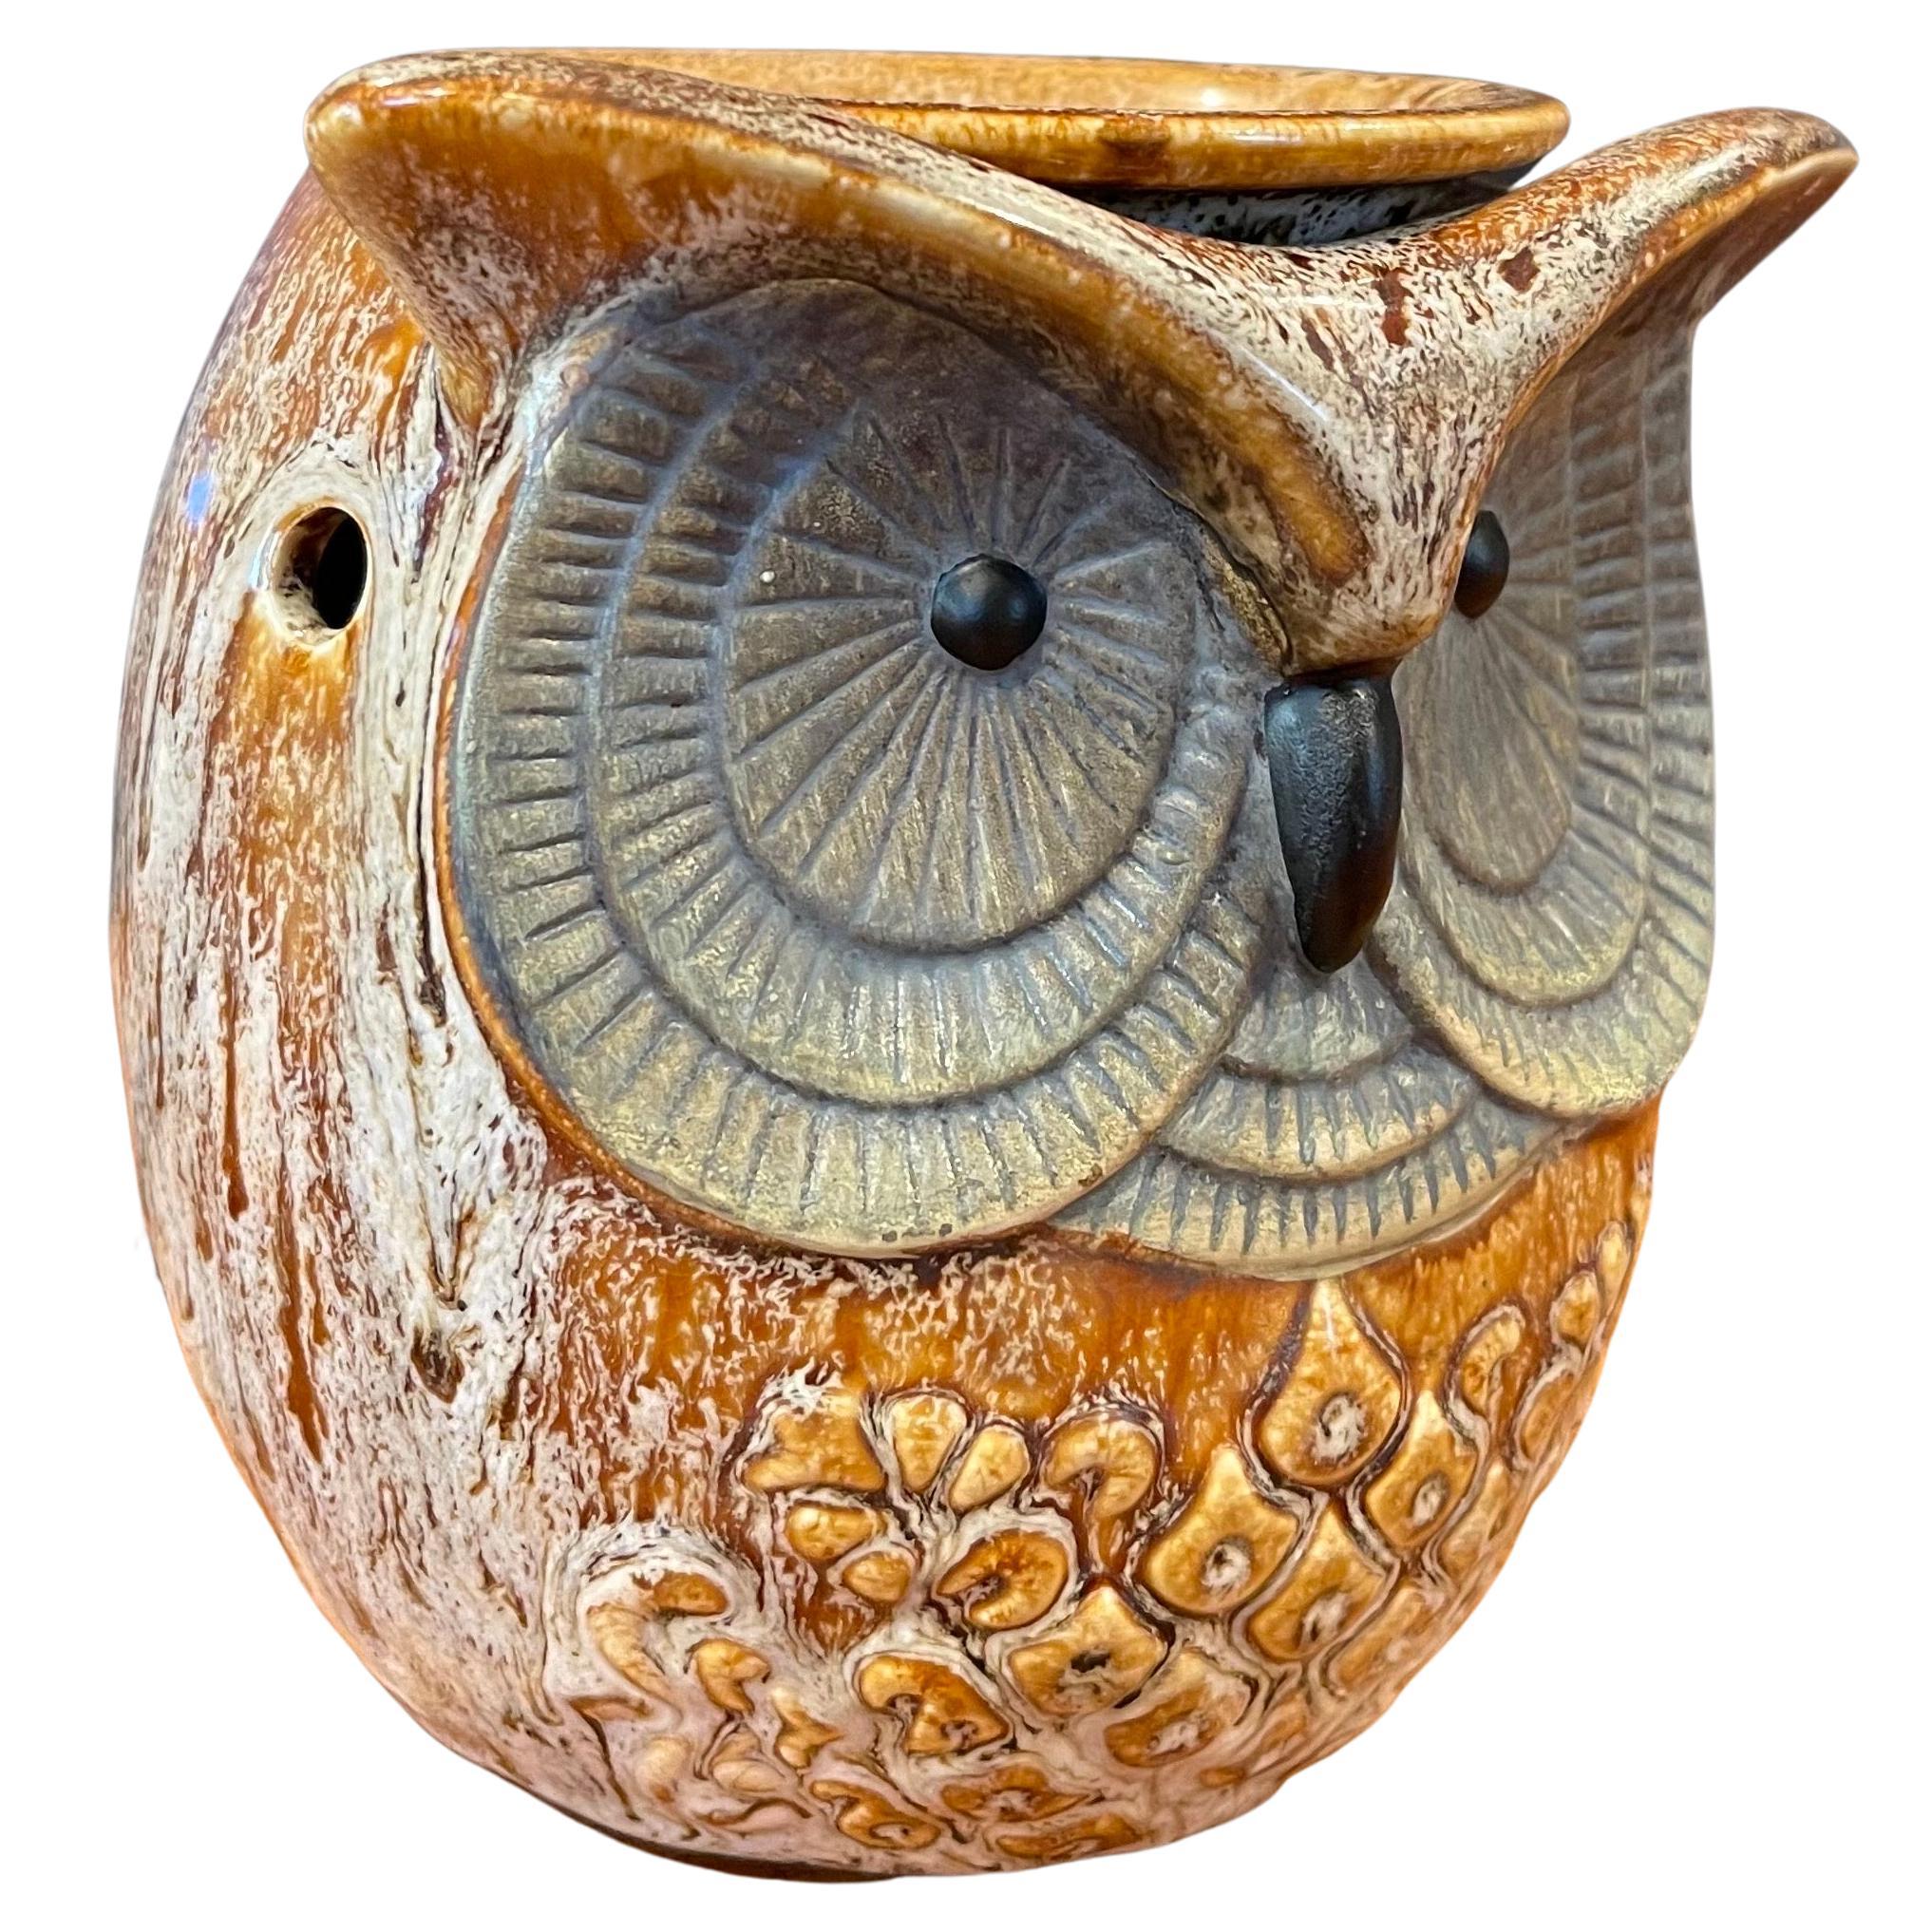 A really cool MCM glazed ceramic pottery owl table lamp, circa 1970s. The lamp is in very good vintage condition with no chips or cracks and measures 5.25